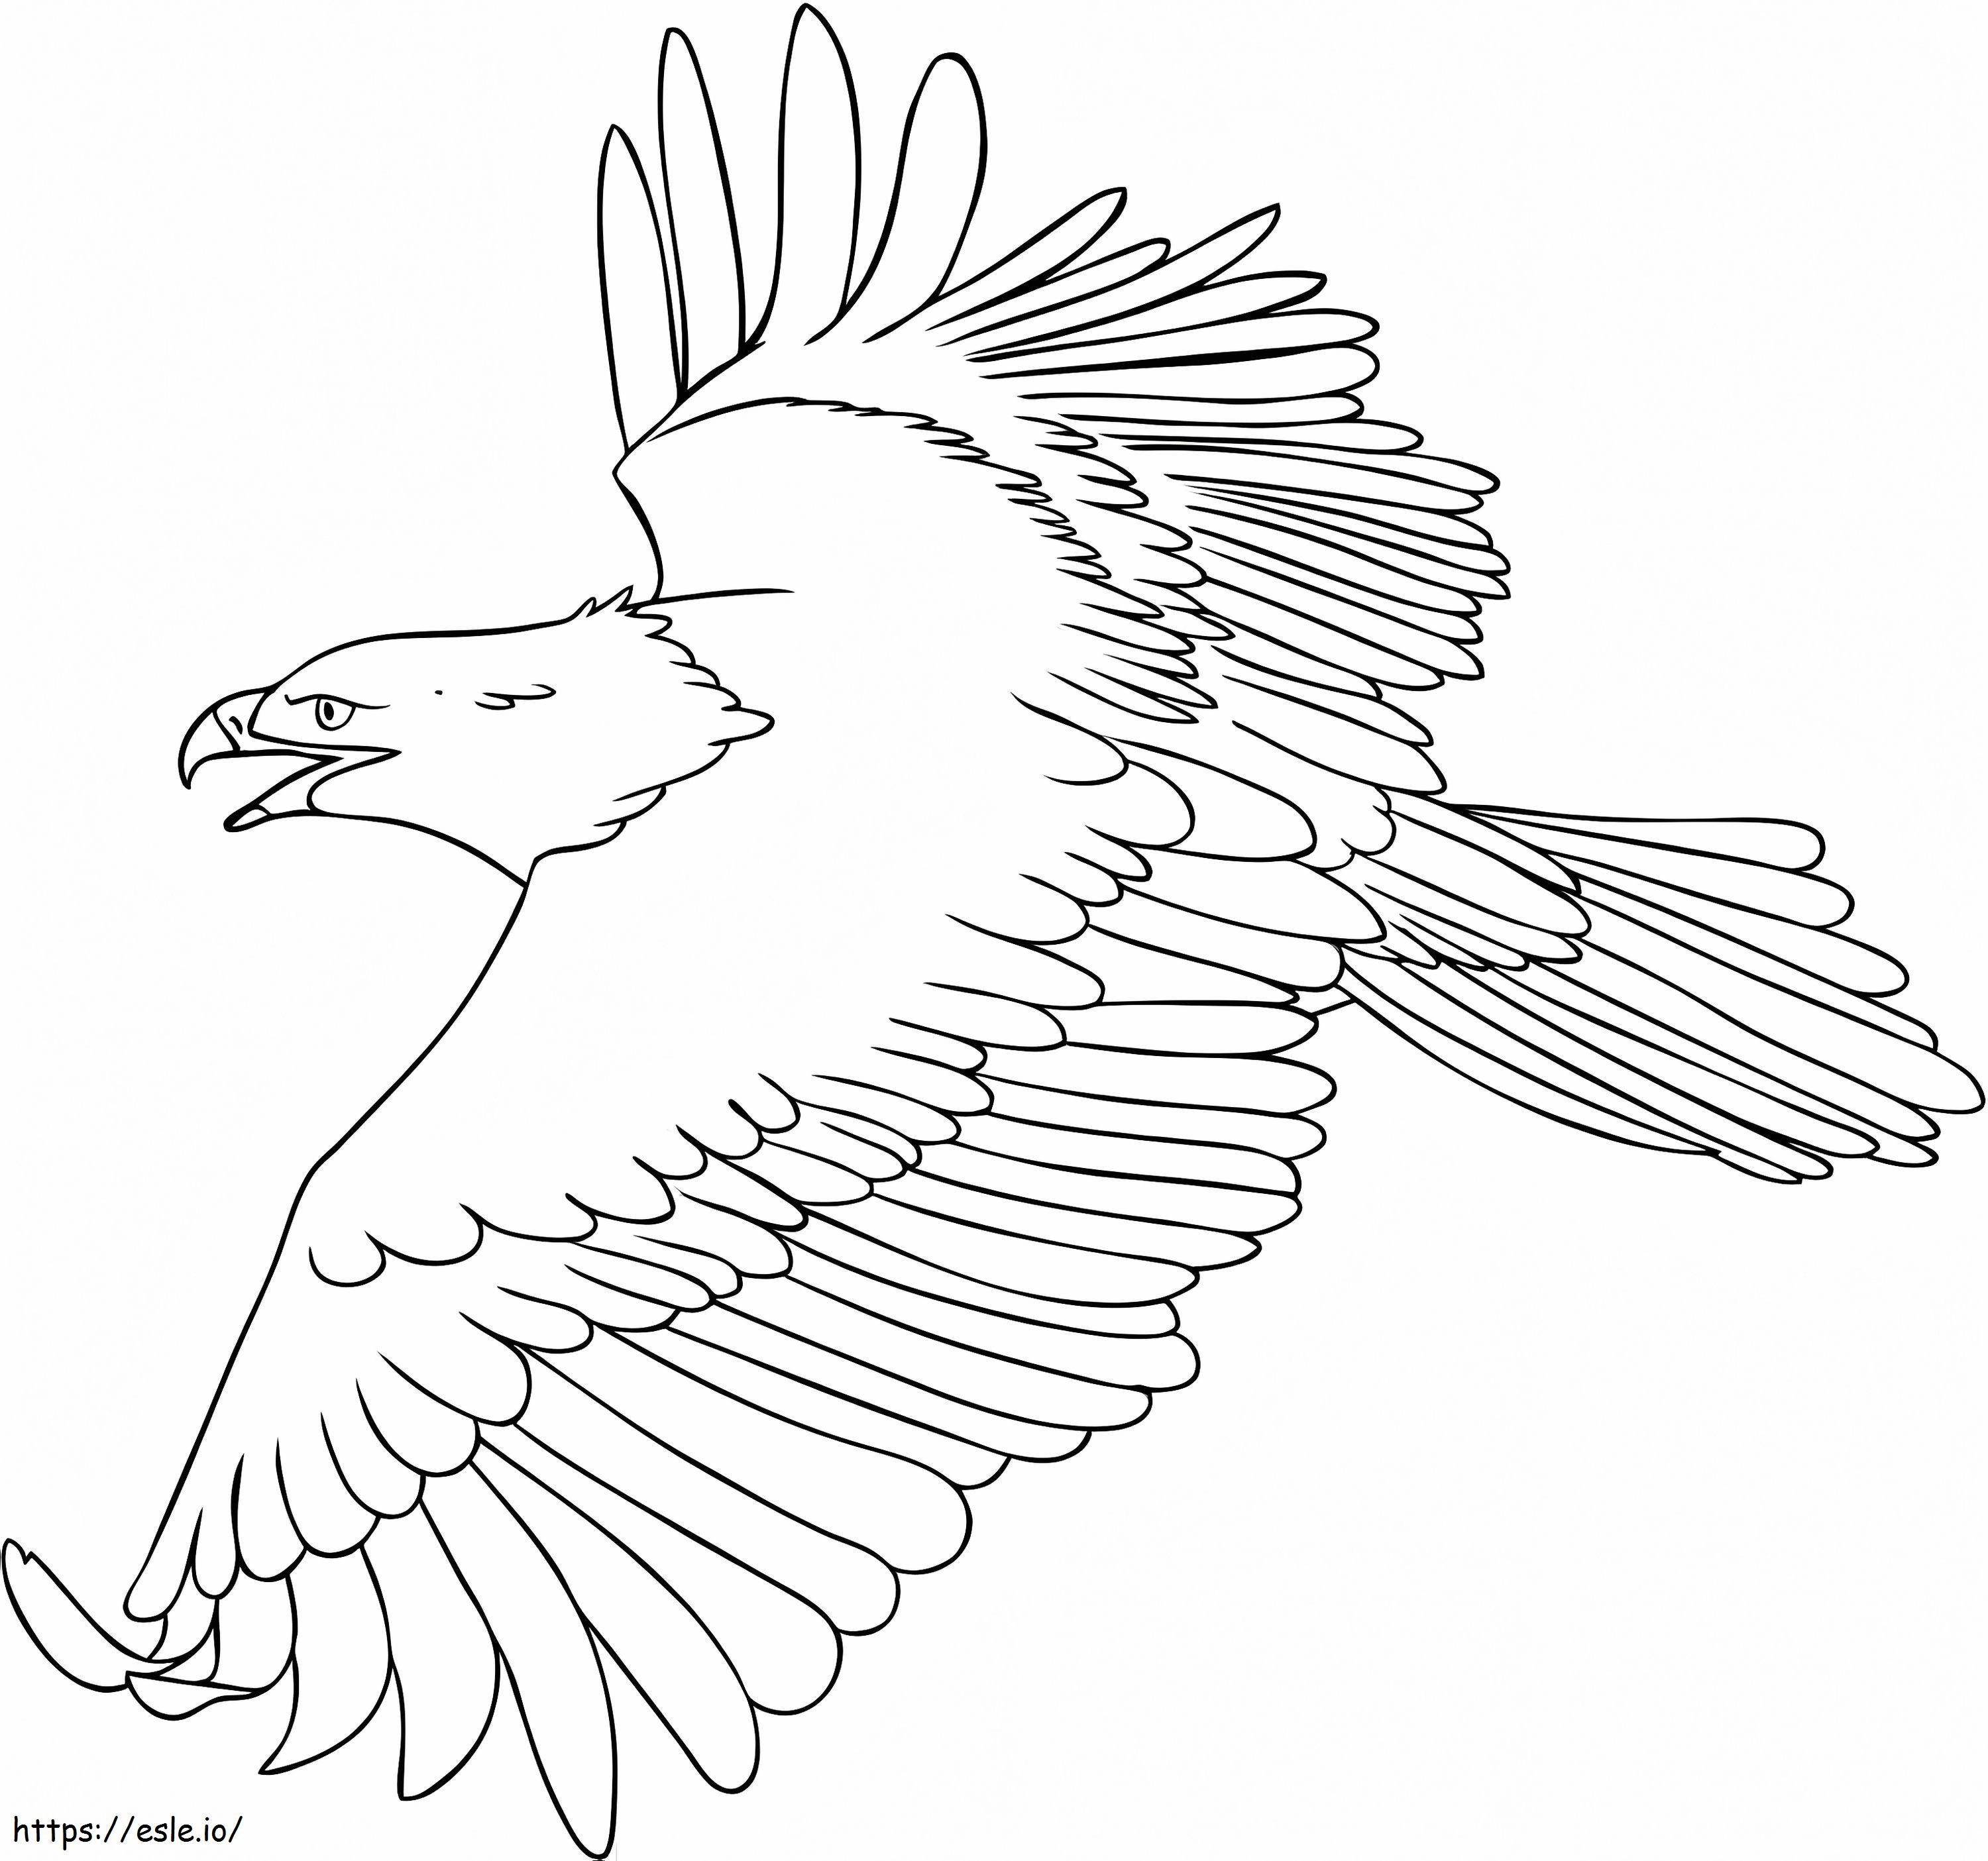 Fly Eagle Coloring Page coloring page